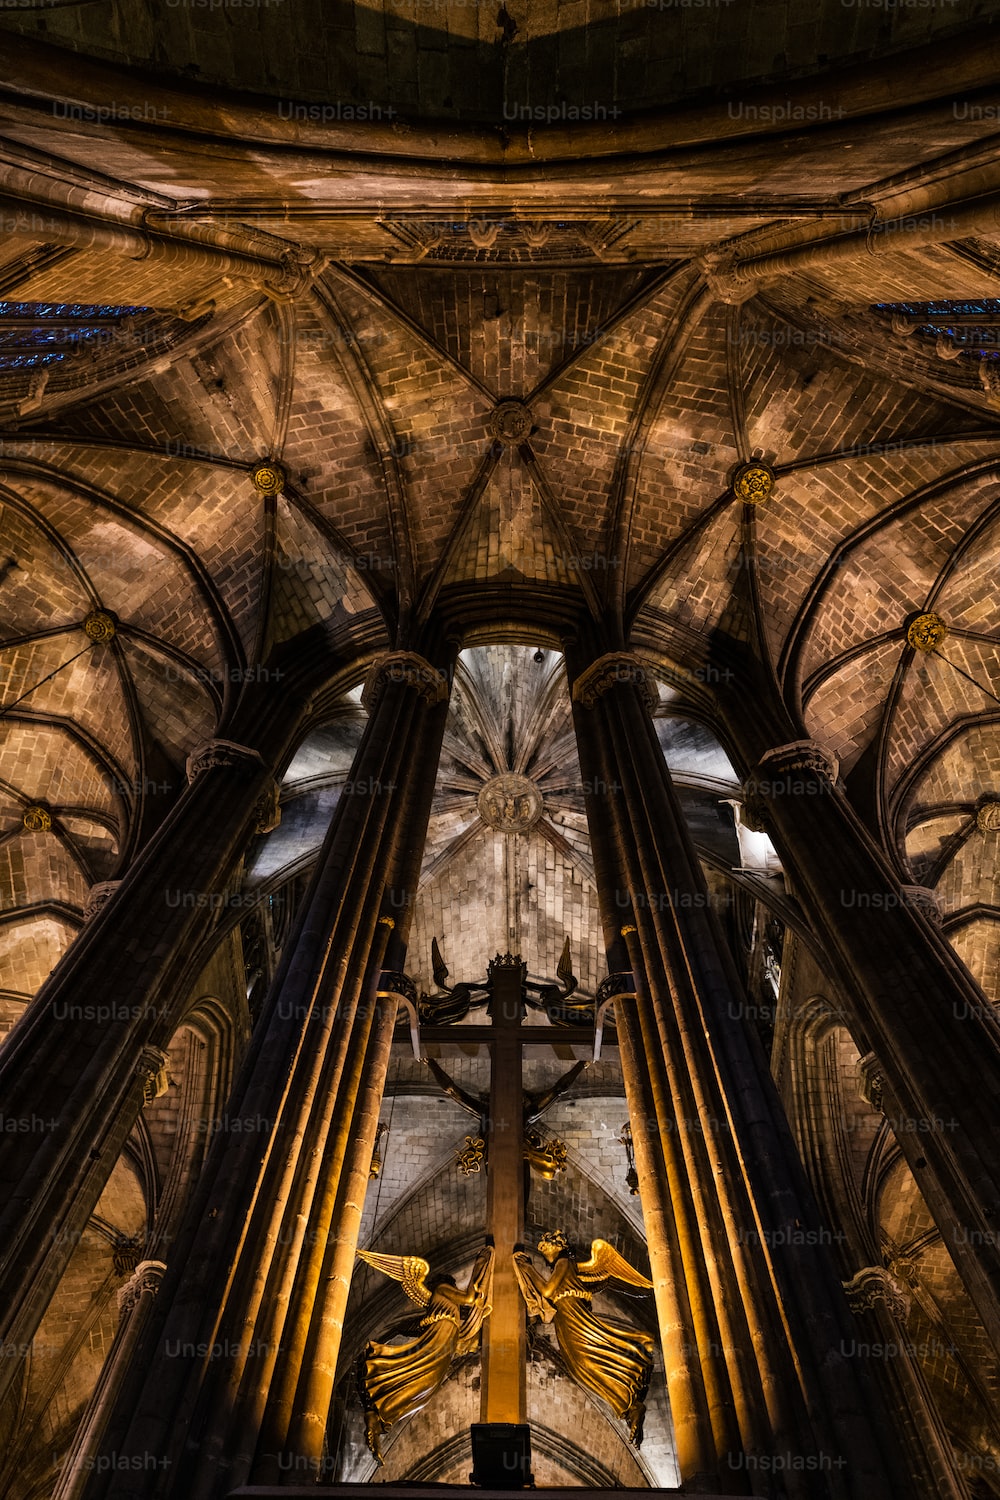 Barcelona Cathedral Wallpapers